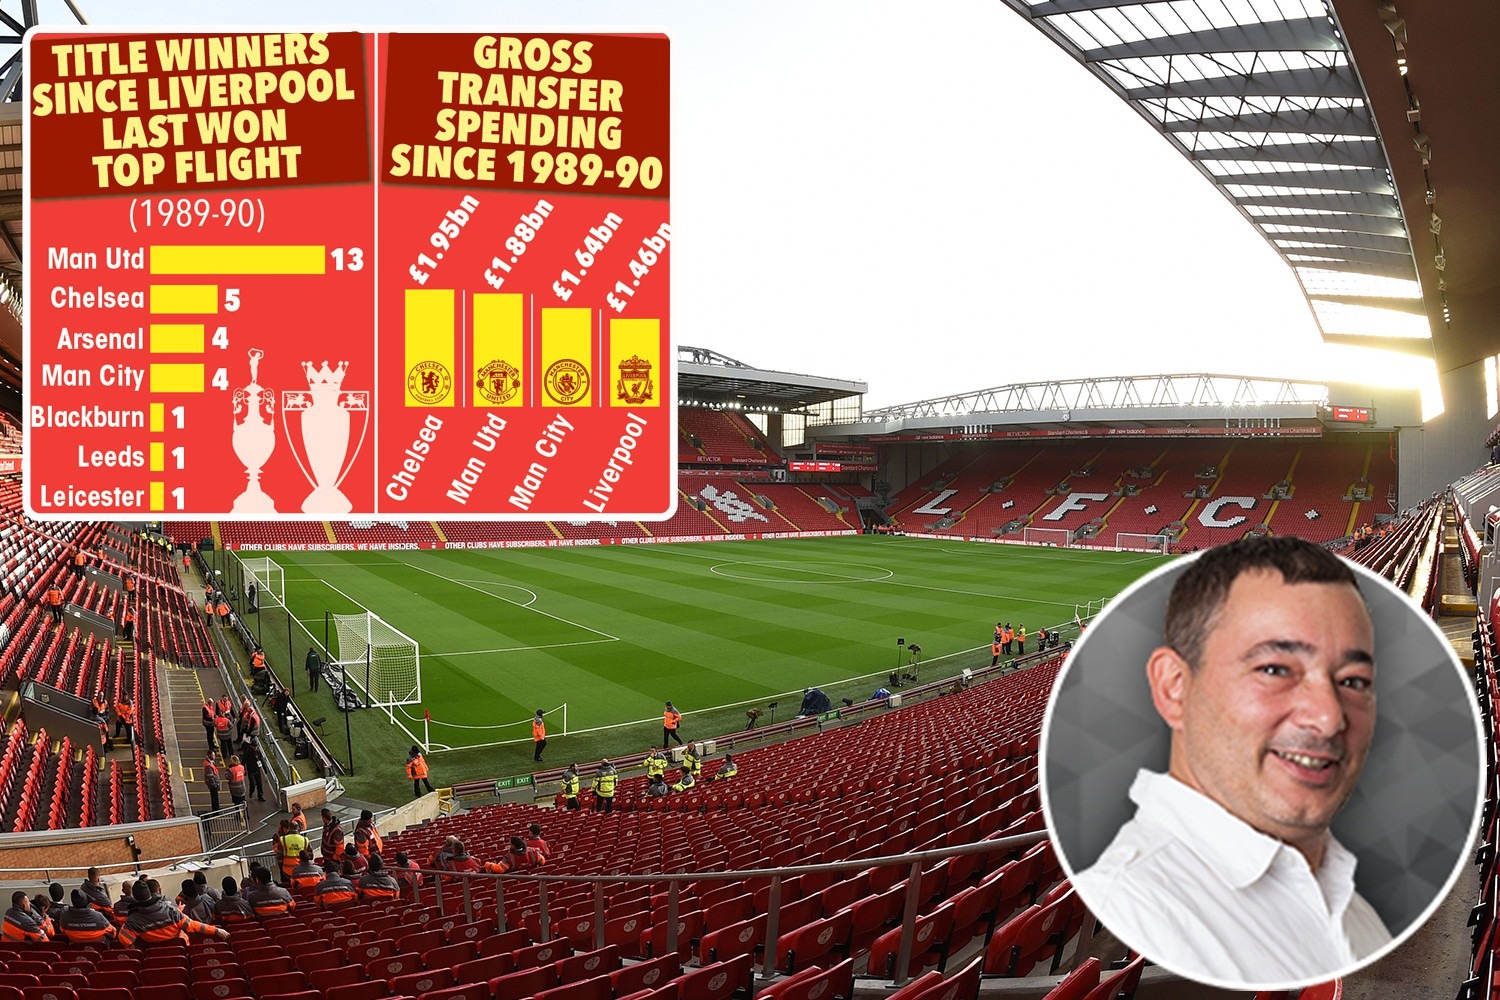 , Liverpool have spent 1.5bn since last title win and may NEVER get a better chance to win Premier League